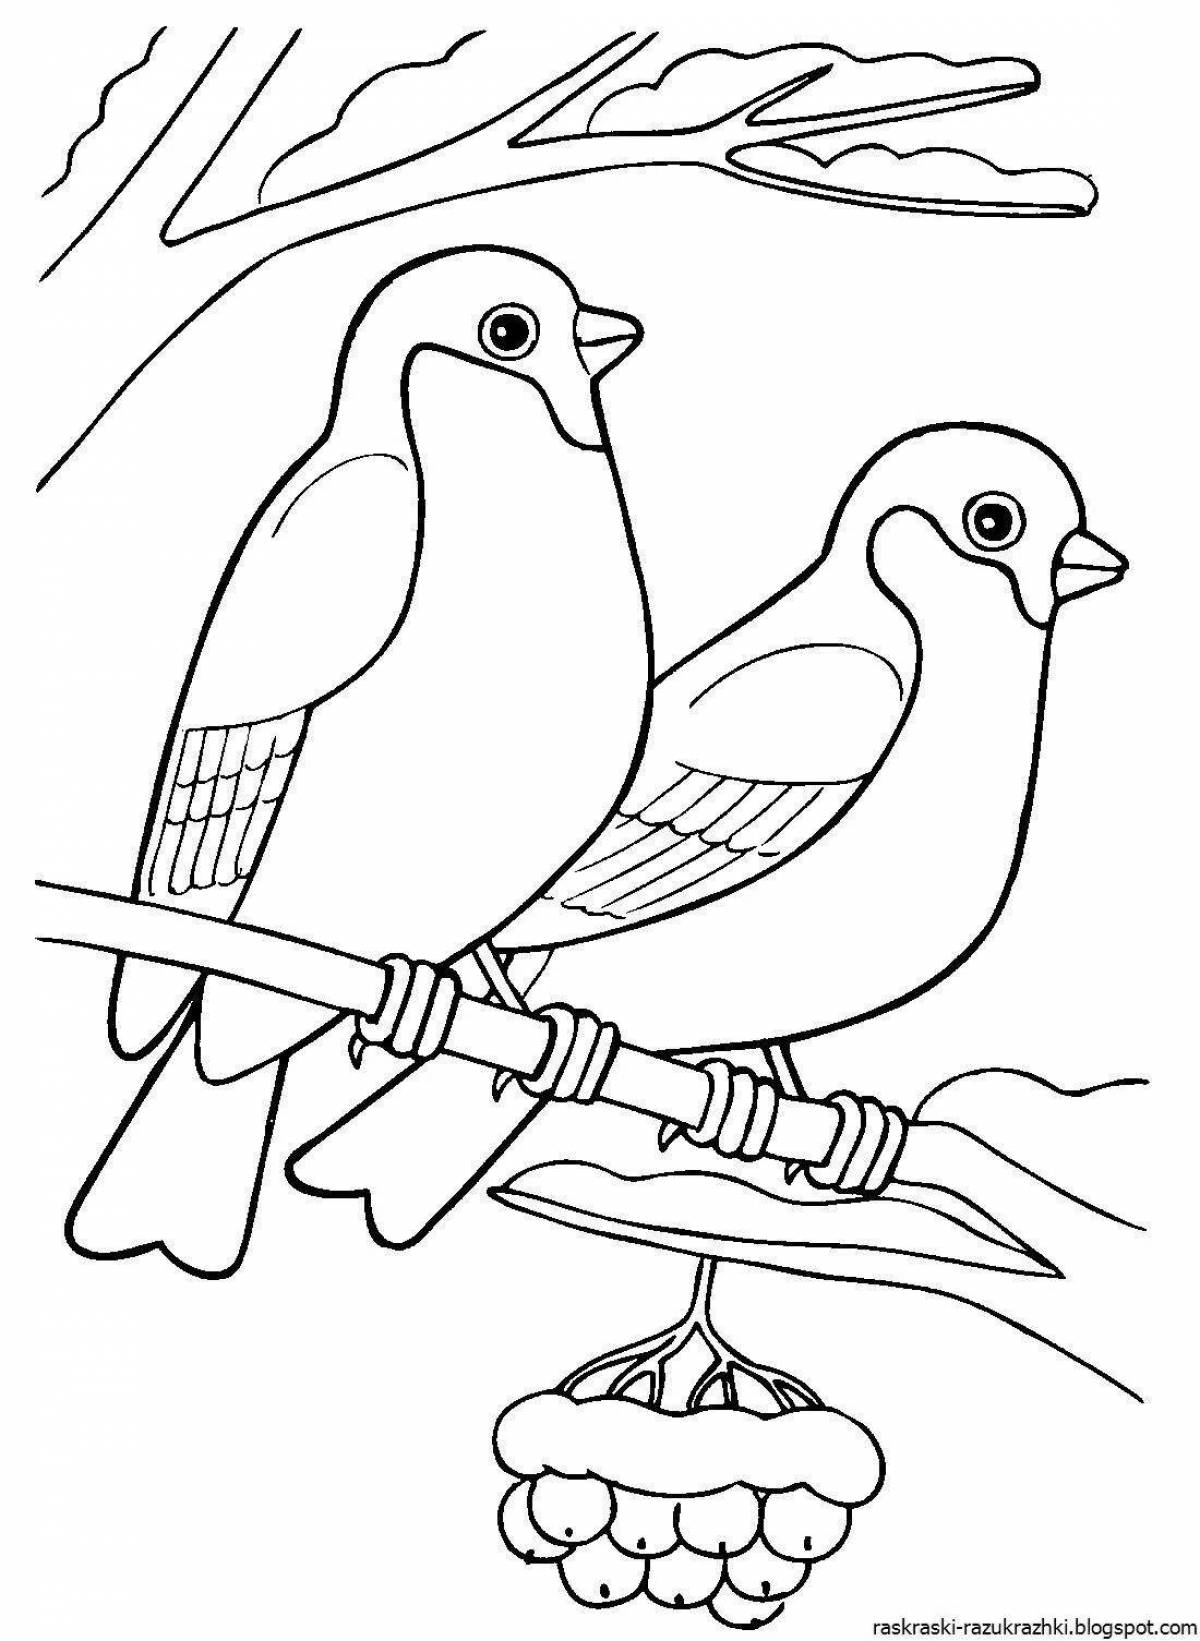 Gorgeous winter birds coloring book for kids